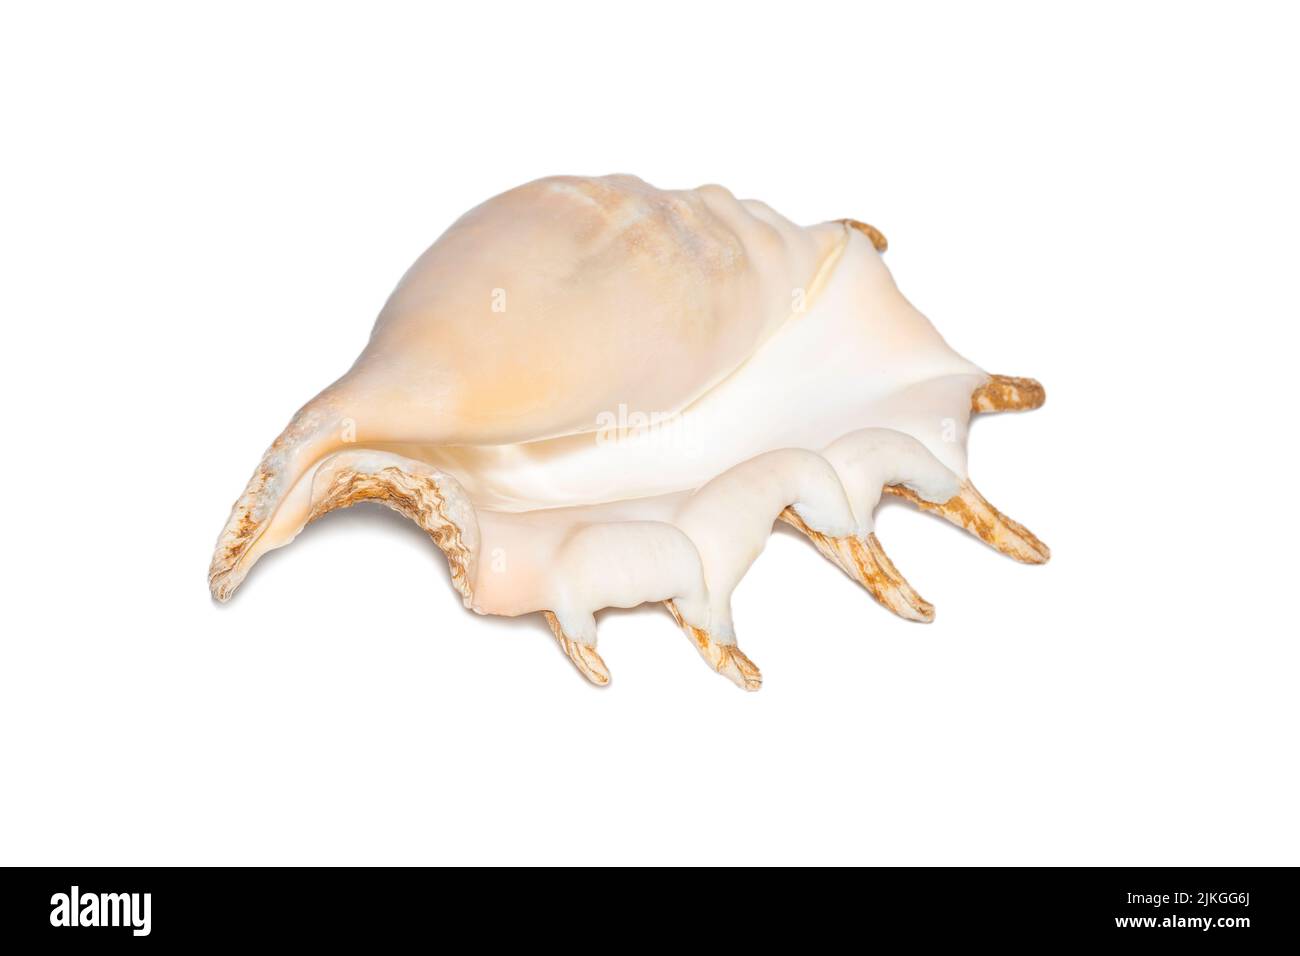 Image of spider conch seashell  on a white background. Sea shells. Undersea Animals. Stock Photo